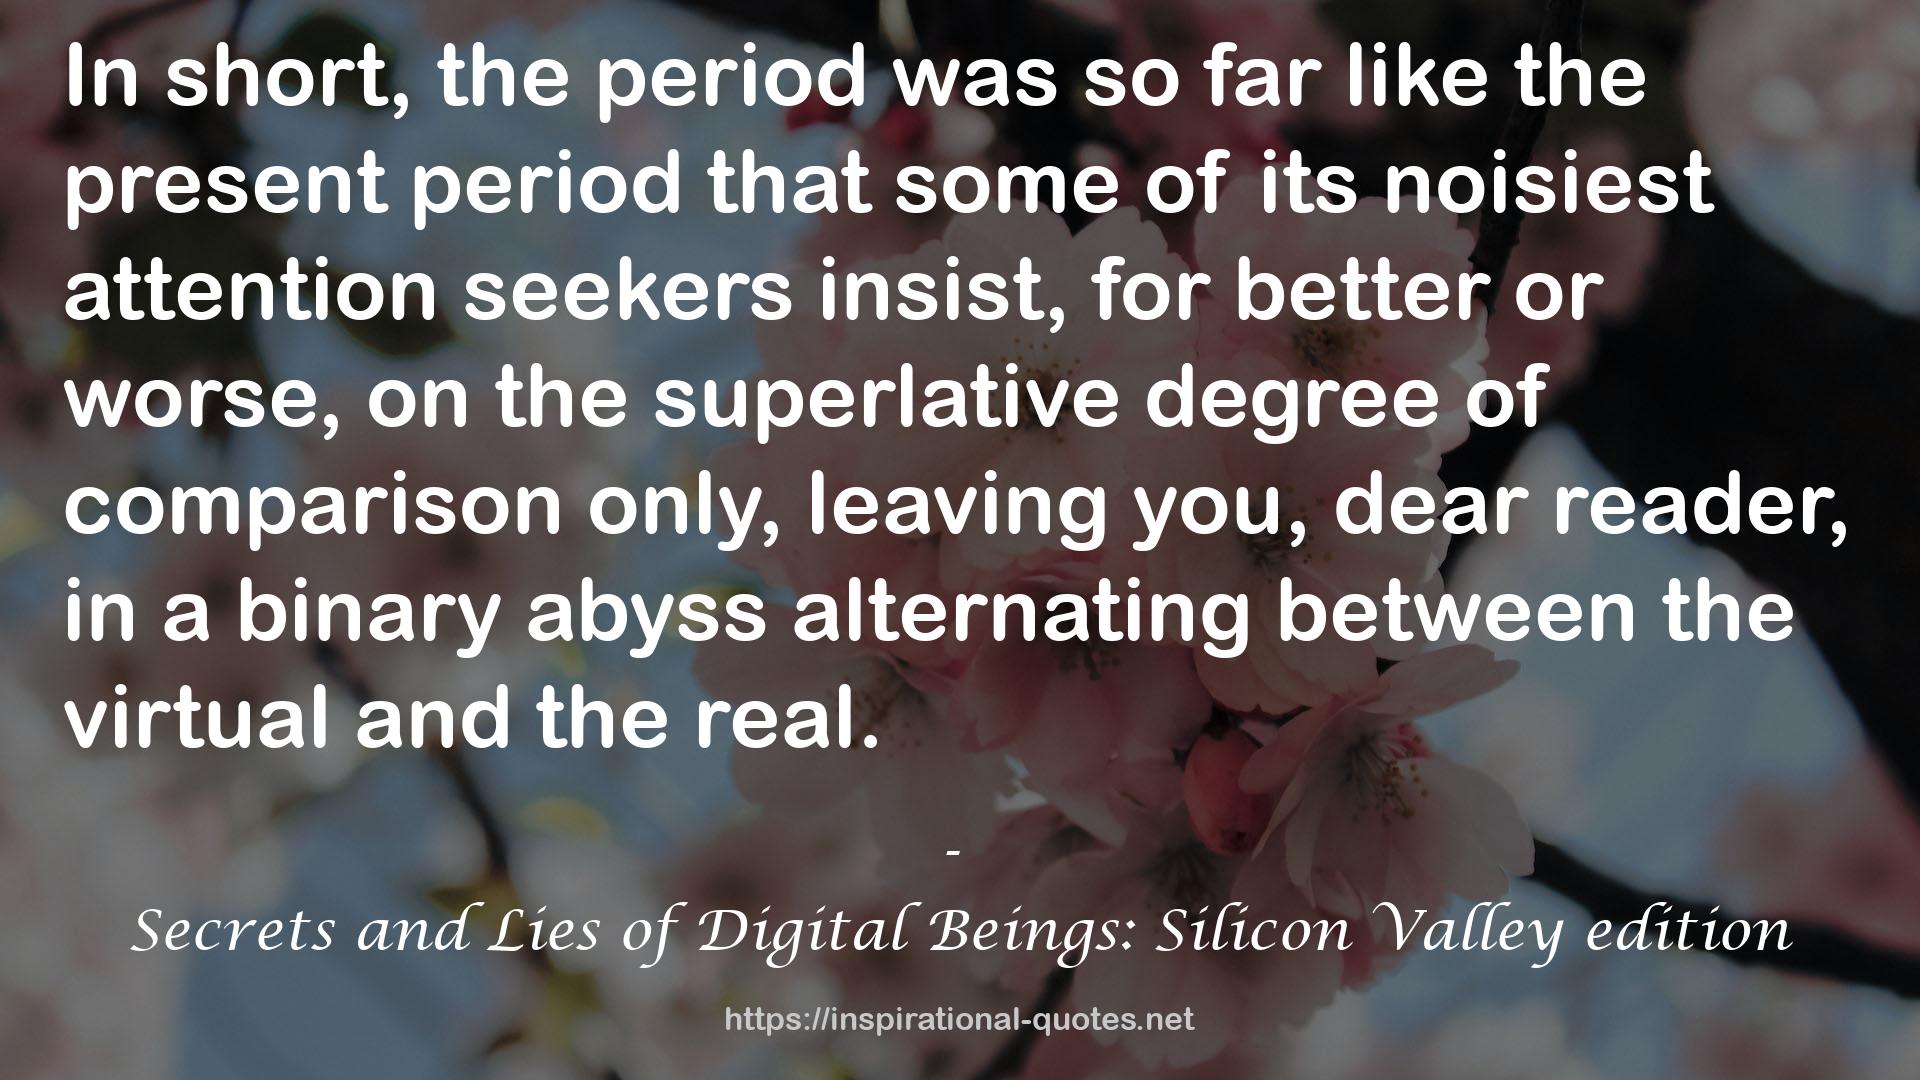 Secrets and Lies of Digital Beings: Silicon Valley edition QUOTES